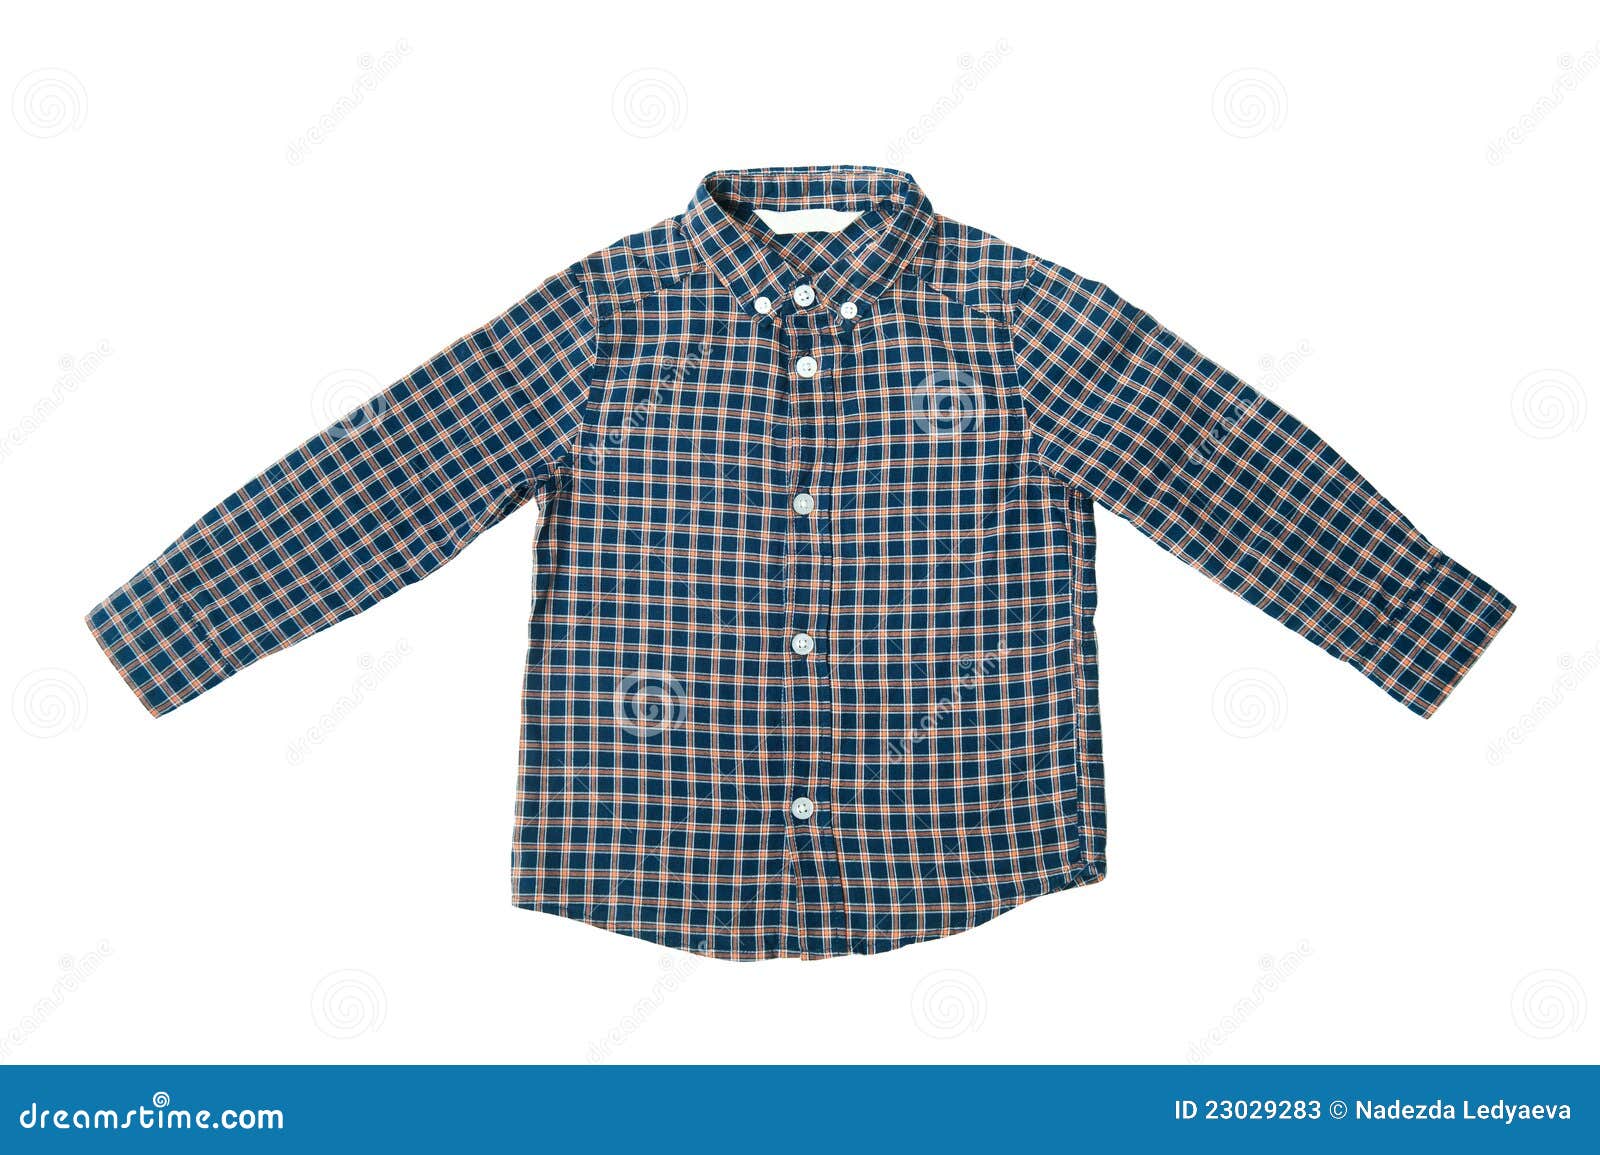 Blue shirt for the boy stock image. Image of sleeve, isolated - 23029283